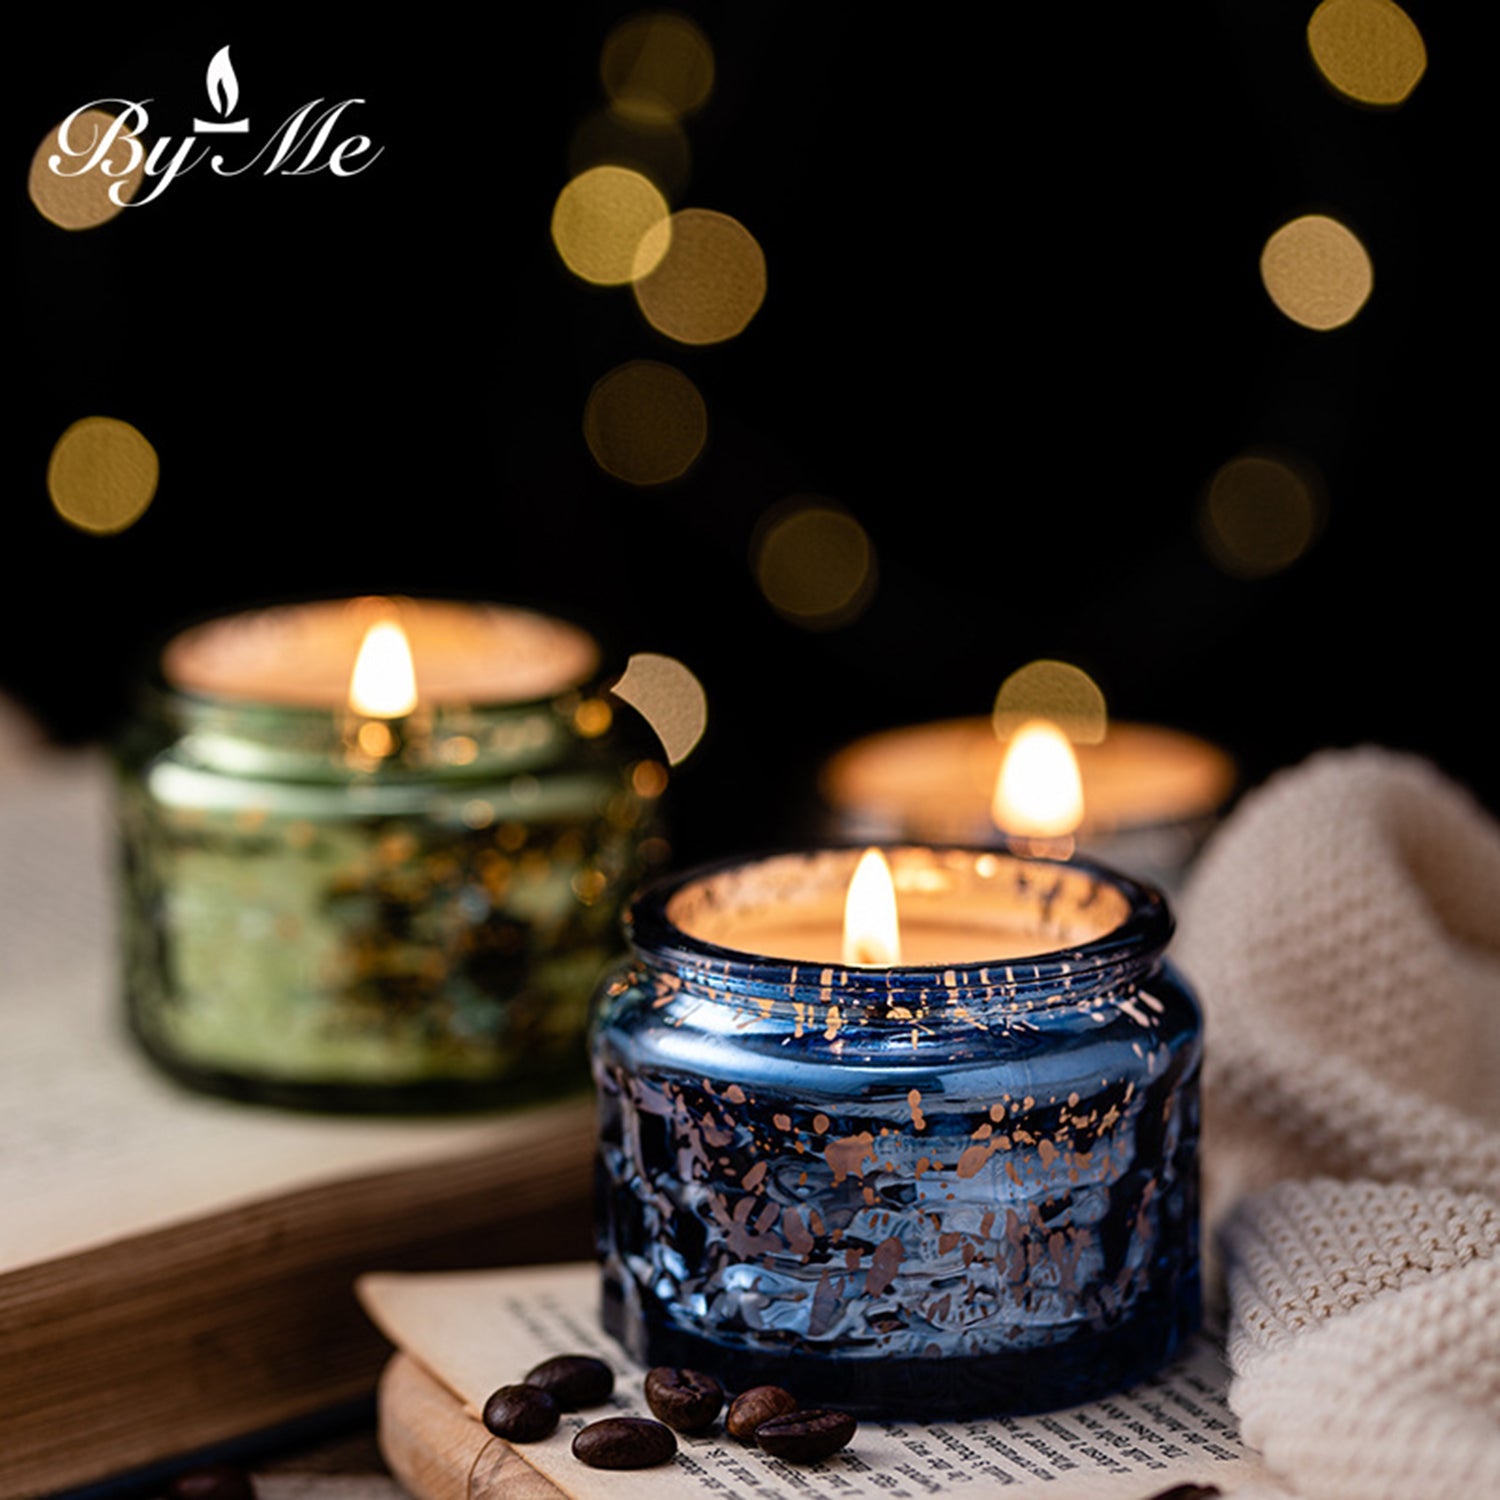 BYME Scented Candle Soy Wax Creative Romantic Starry Sky Cup Handmade Aromatherapy Candle Gift Ideas Small Size Scented Candle BYME 